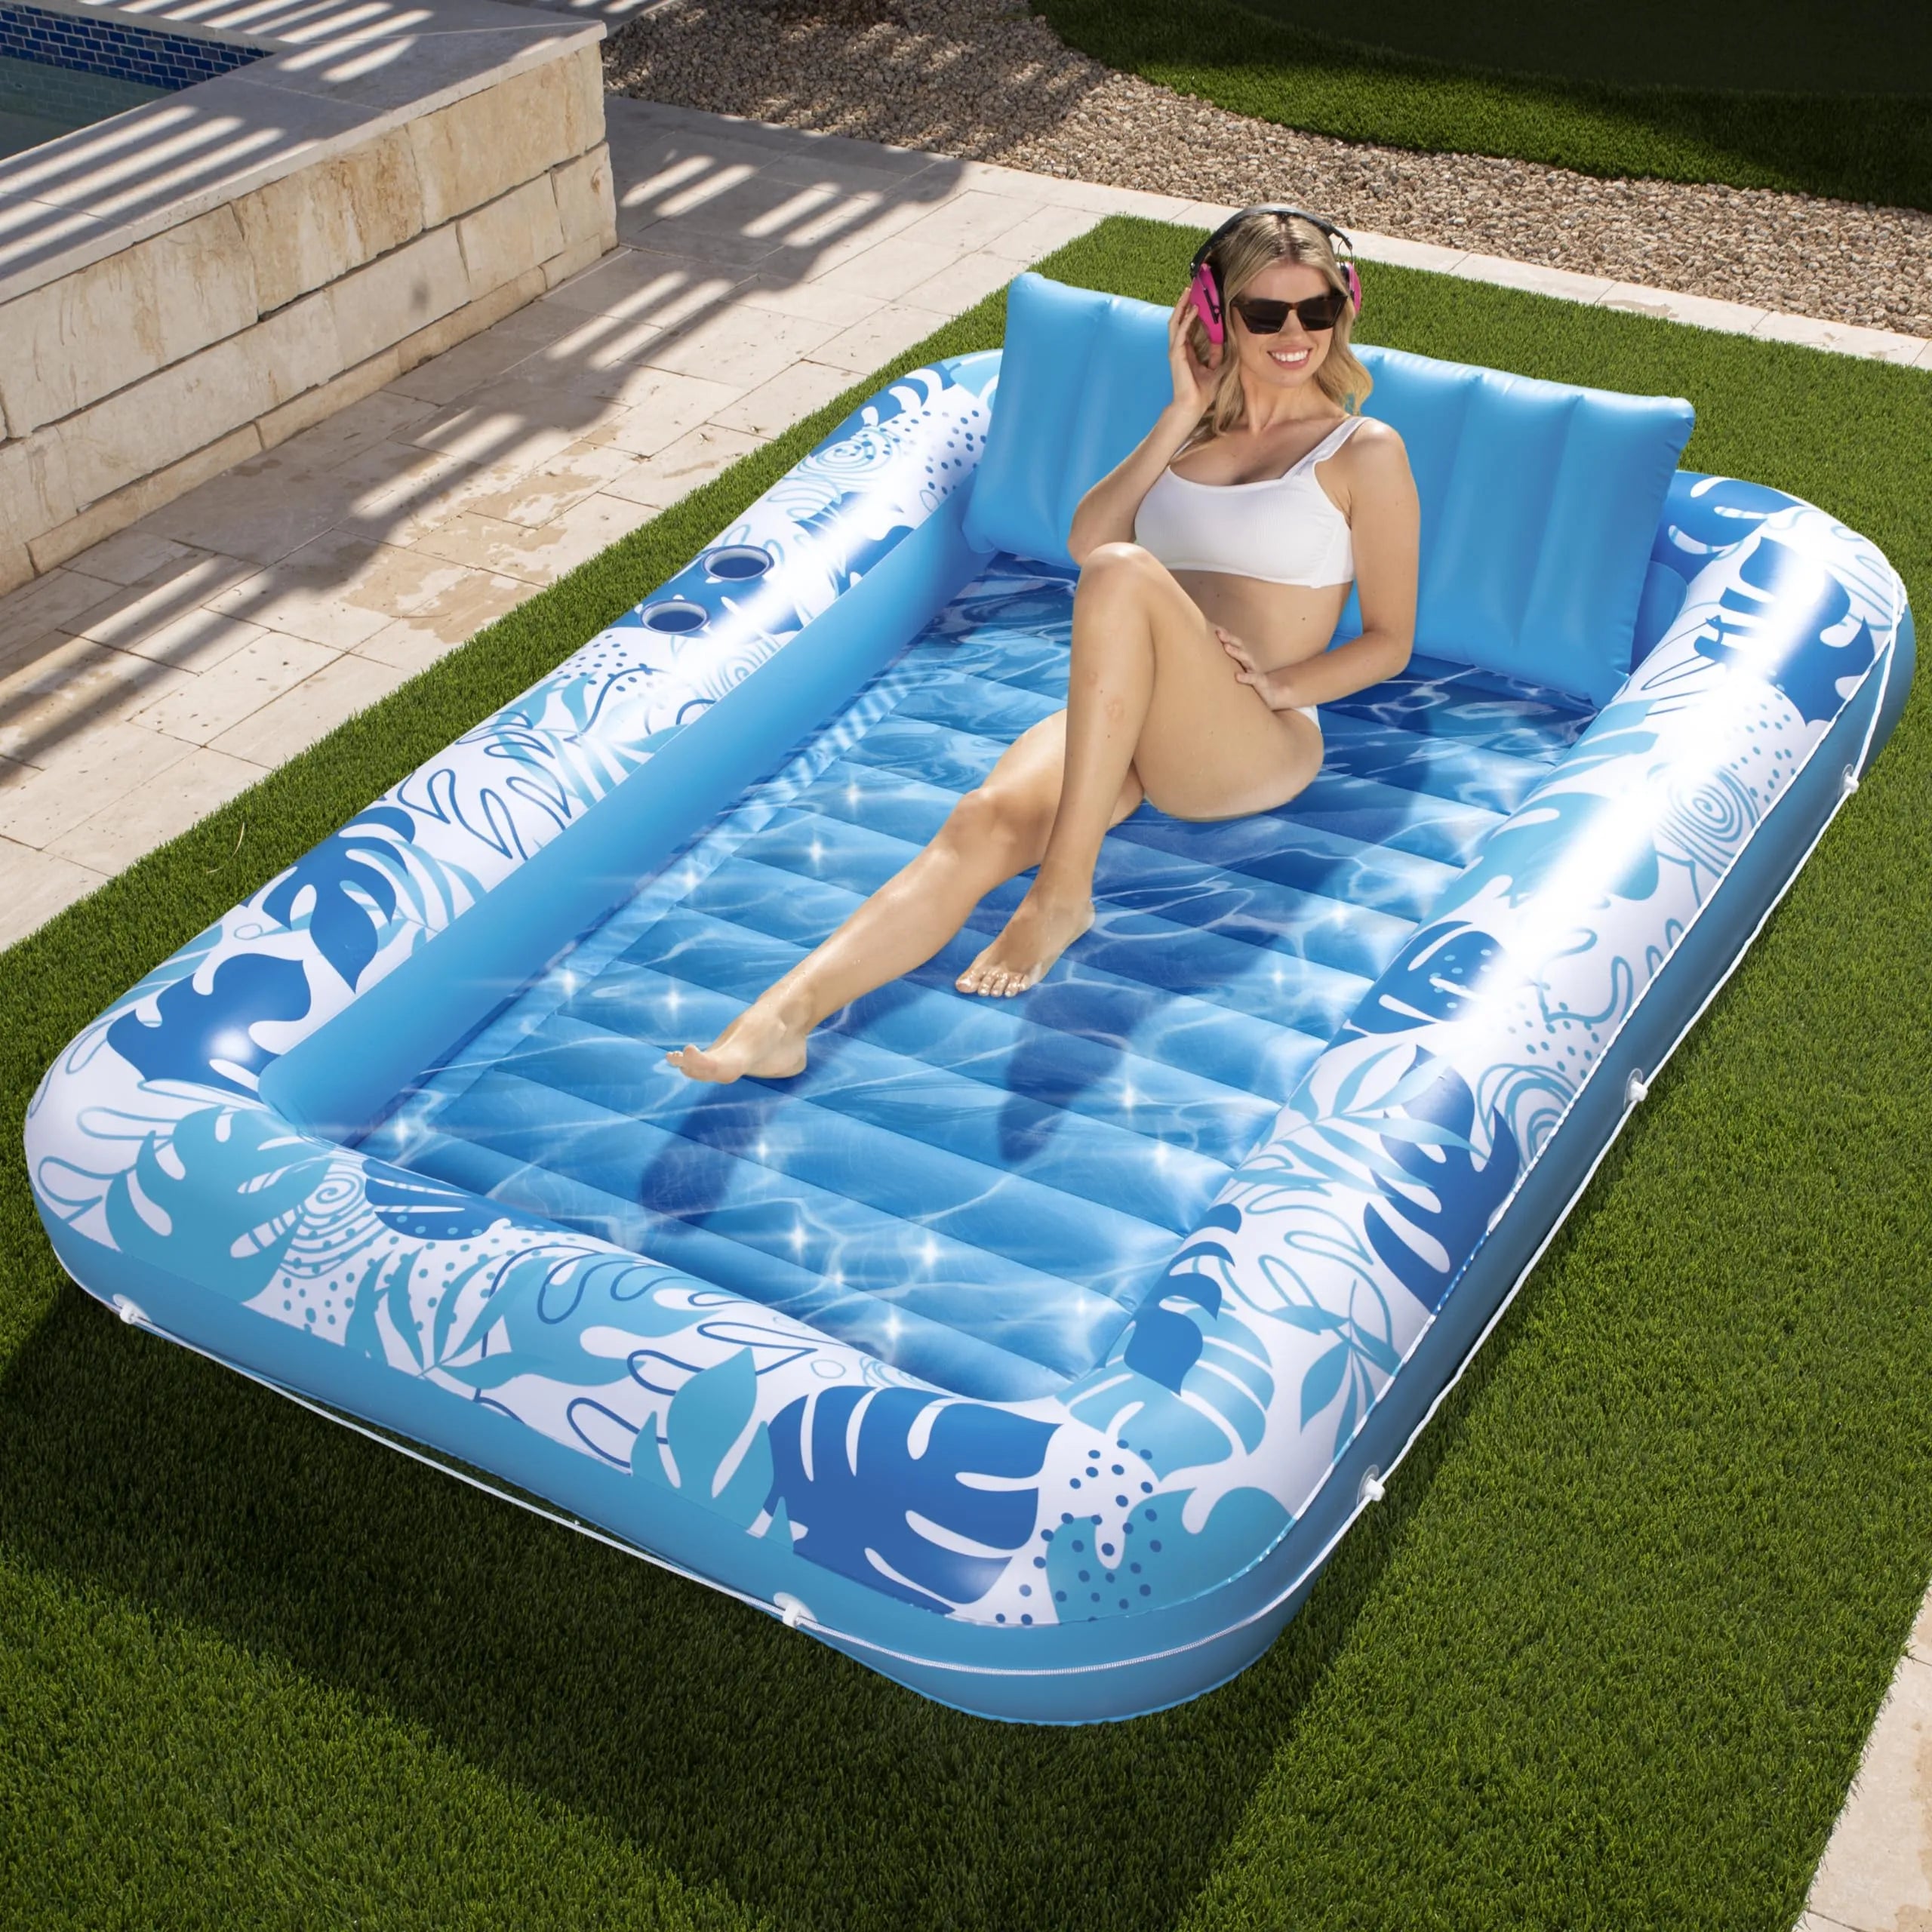 At JOYIN The Summer Fun Starts HERE! | MOST EPIC INFLATABLE POOL